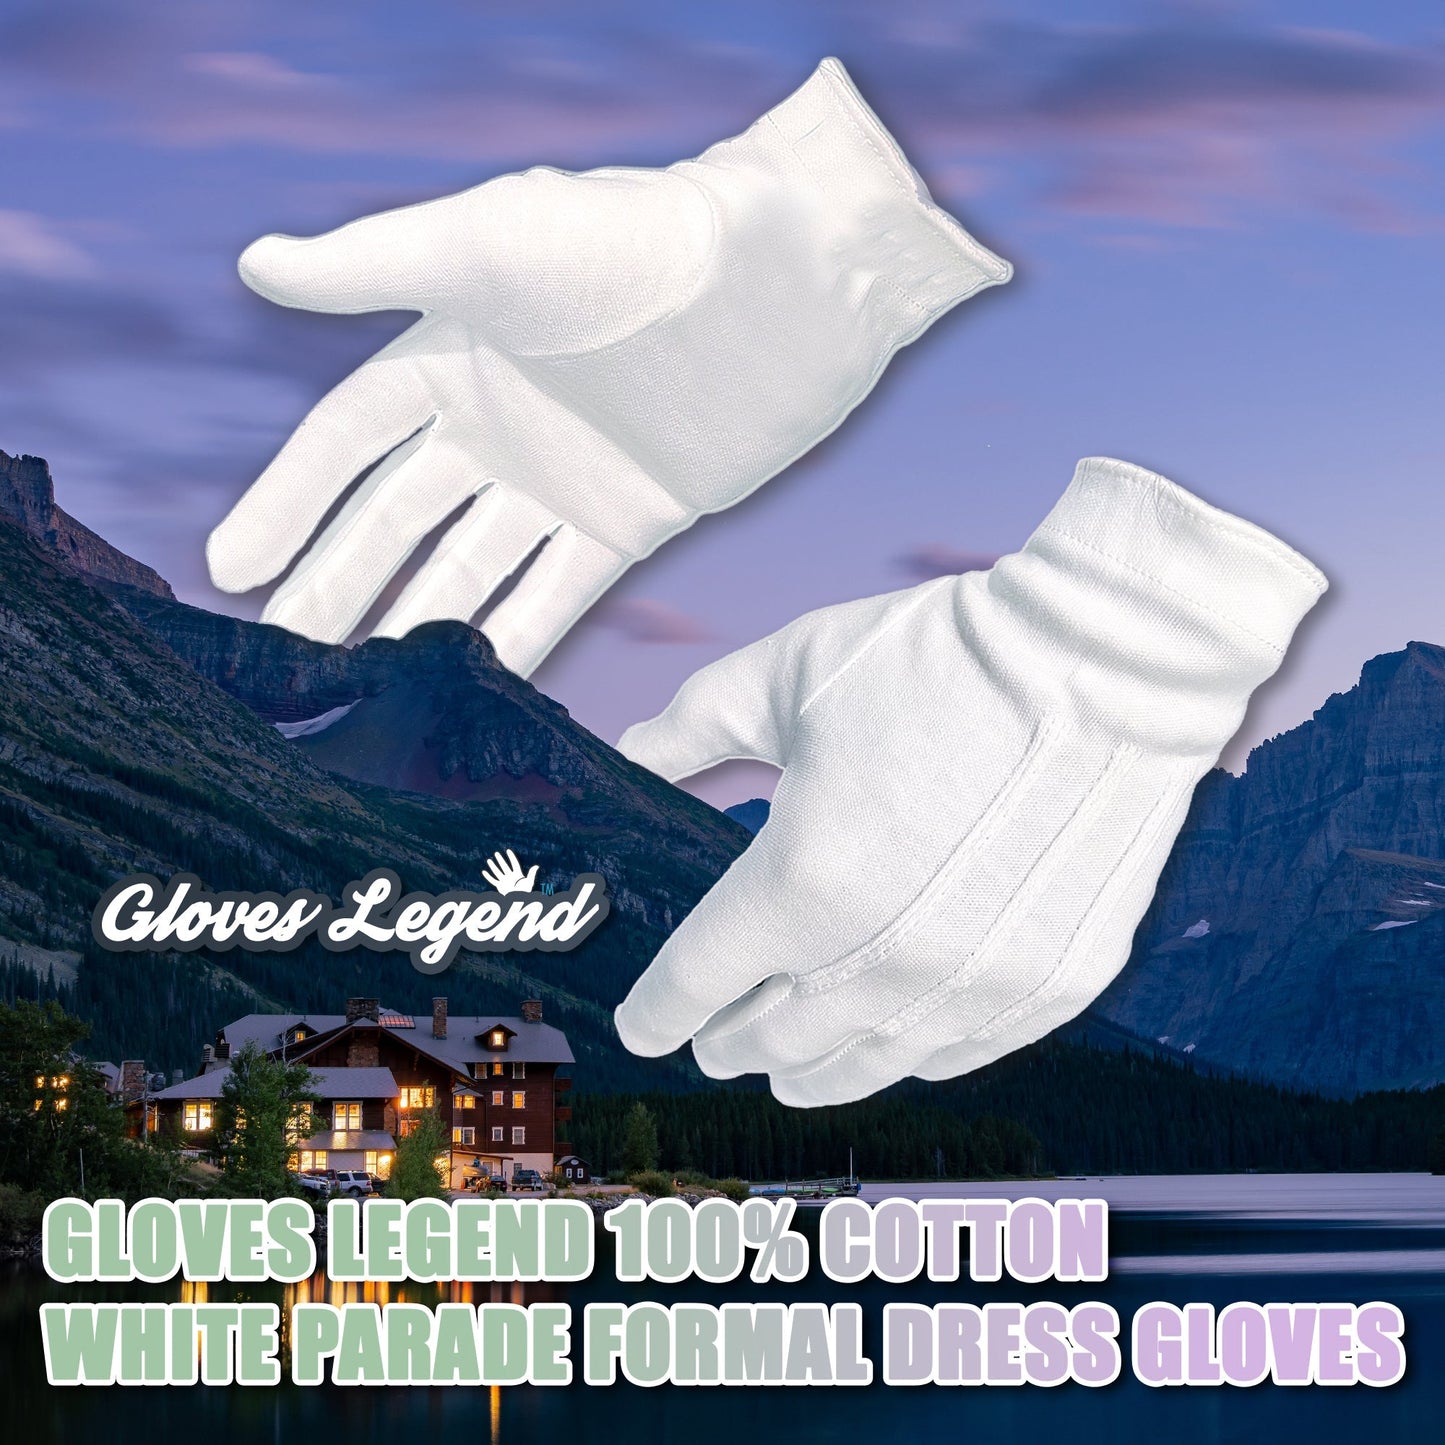 1 Pairs (2 Gloves) Size Extra Large - Gloves Legend 100% White Cotton Marching Parade Formal Dress Gloves